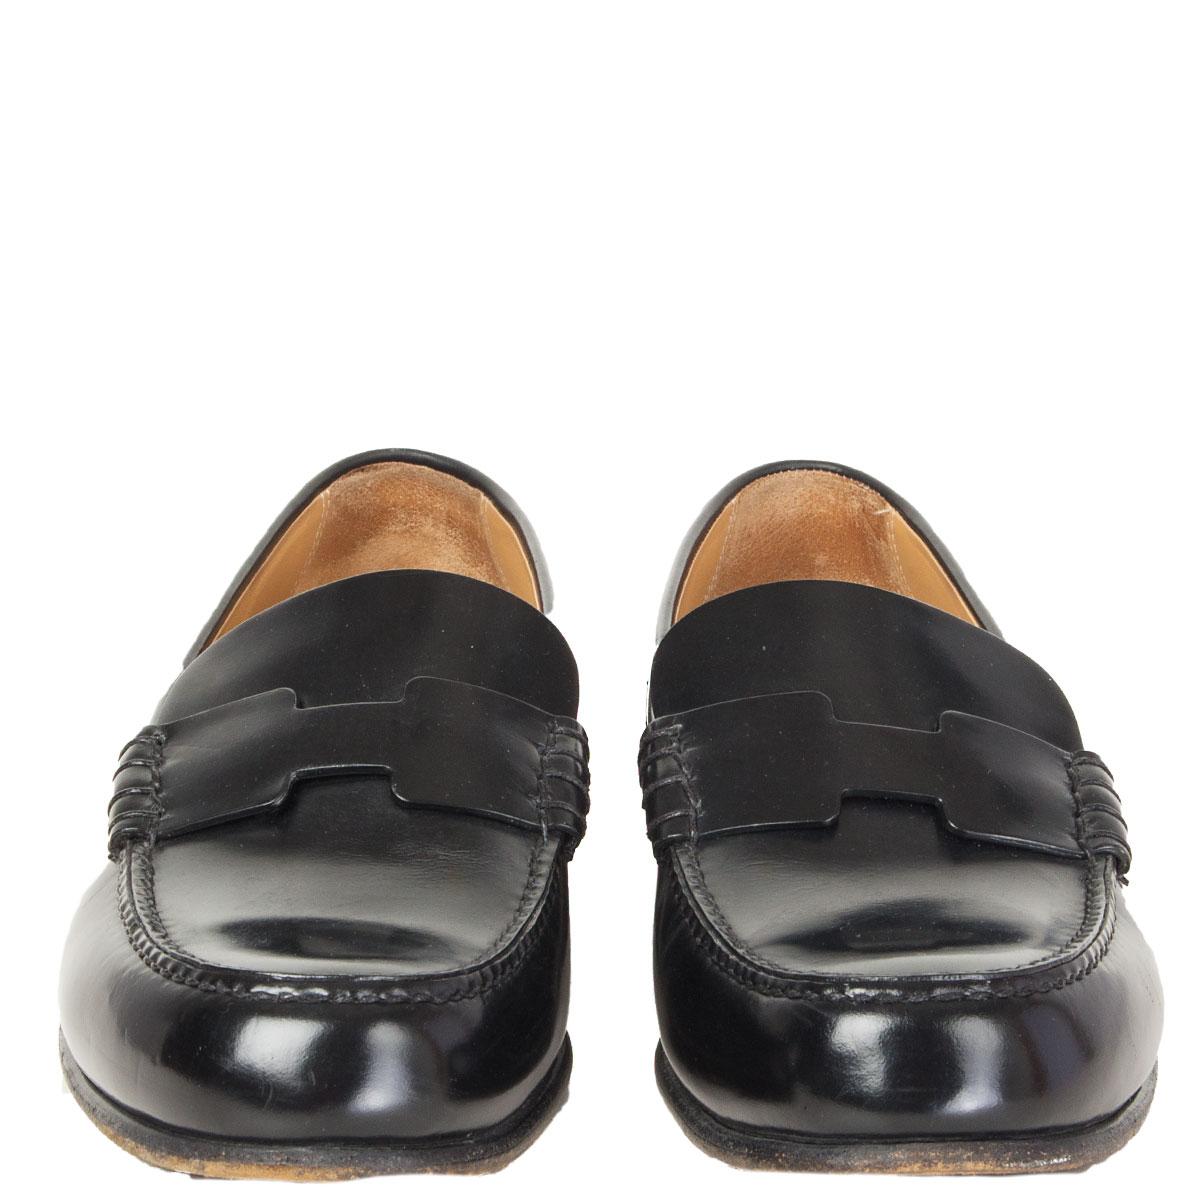 100% authentic Hermes 'Kennedy' loaers in black glazed leather. Have been worn and are in excellent condition.

Imprinted Size 36.6
Shoe Size 36.5
Inside Sole 23cm (9in)
Width 8cm (3.1in)

All our listings include only the listed item unless